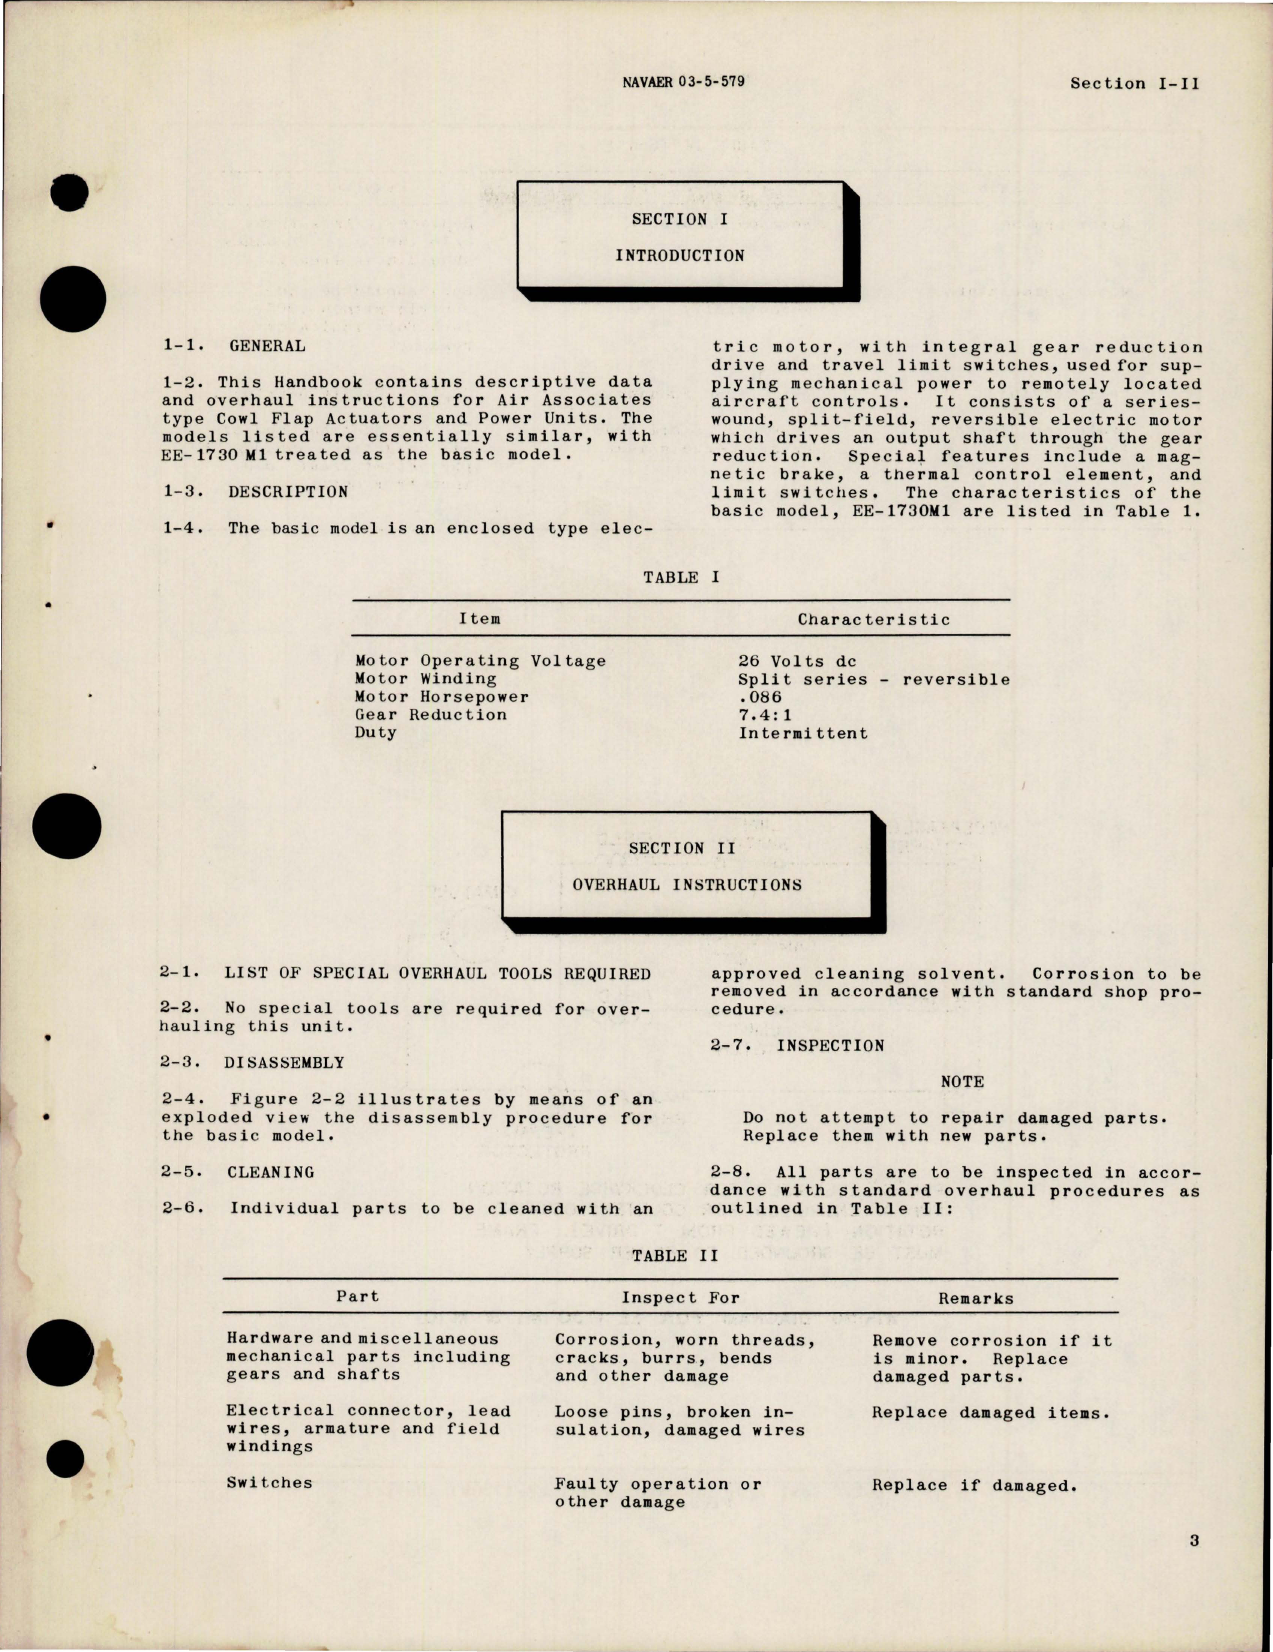 Sample page 5 from AirCorps Library document: Overhaul Instructions for Cowl Flap Actuators and Power Unit 